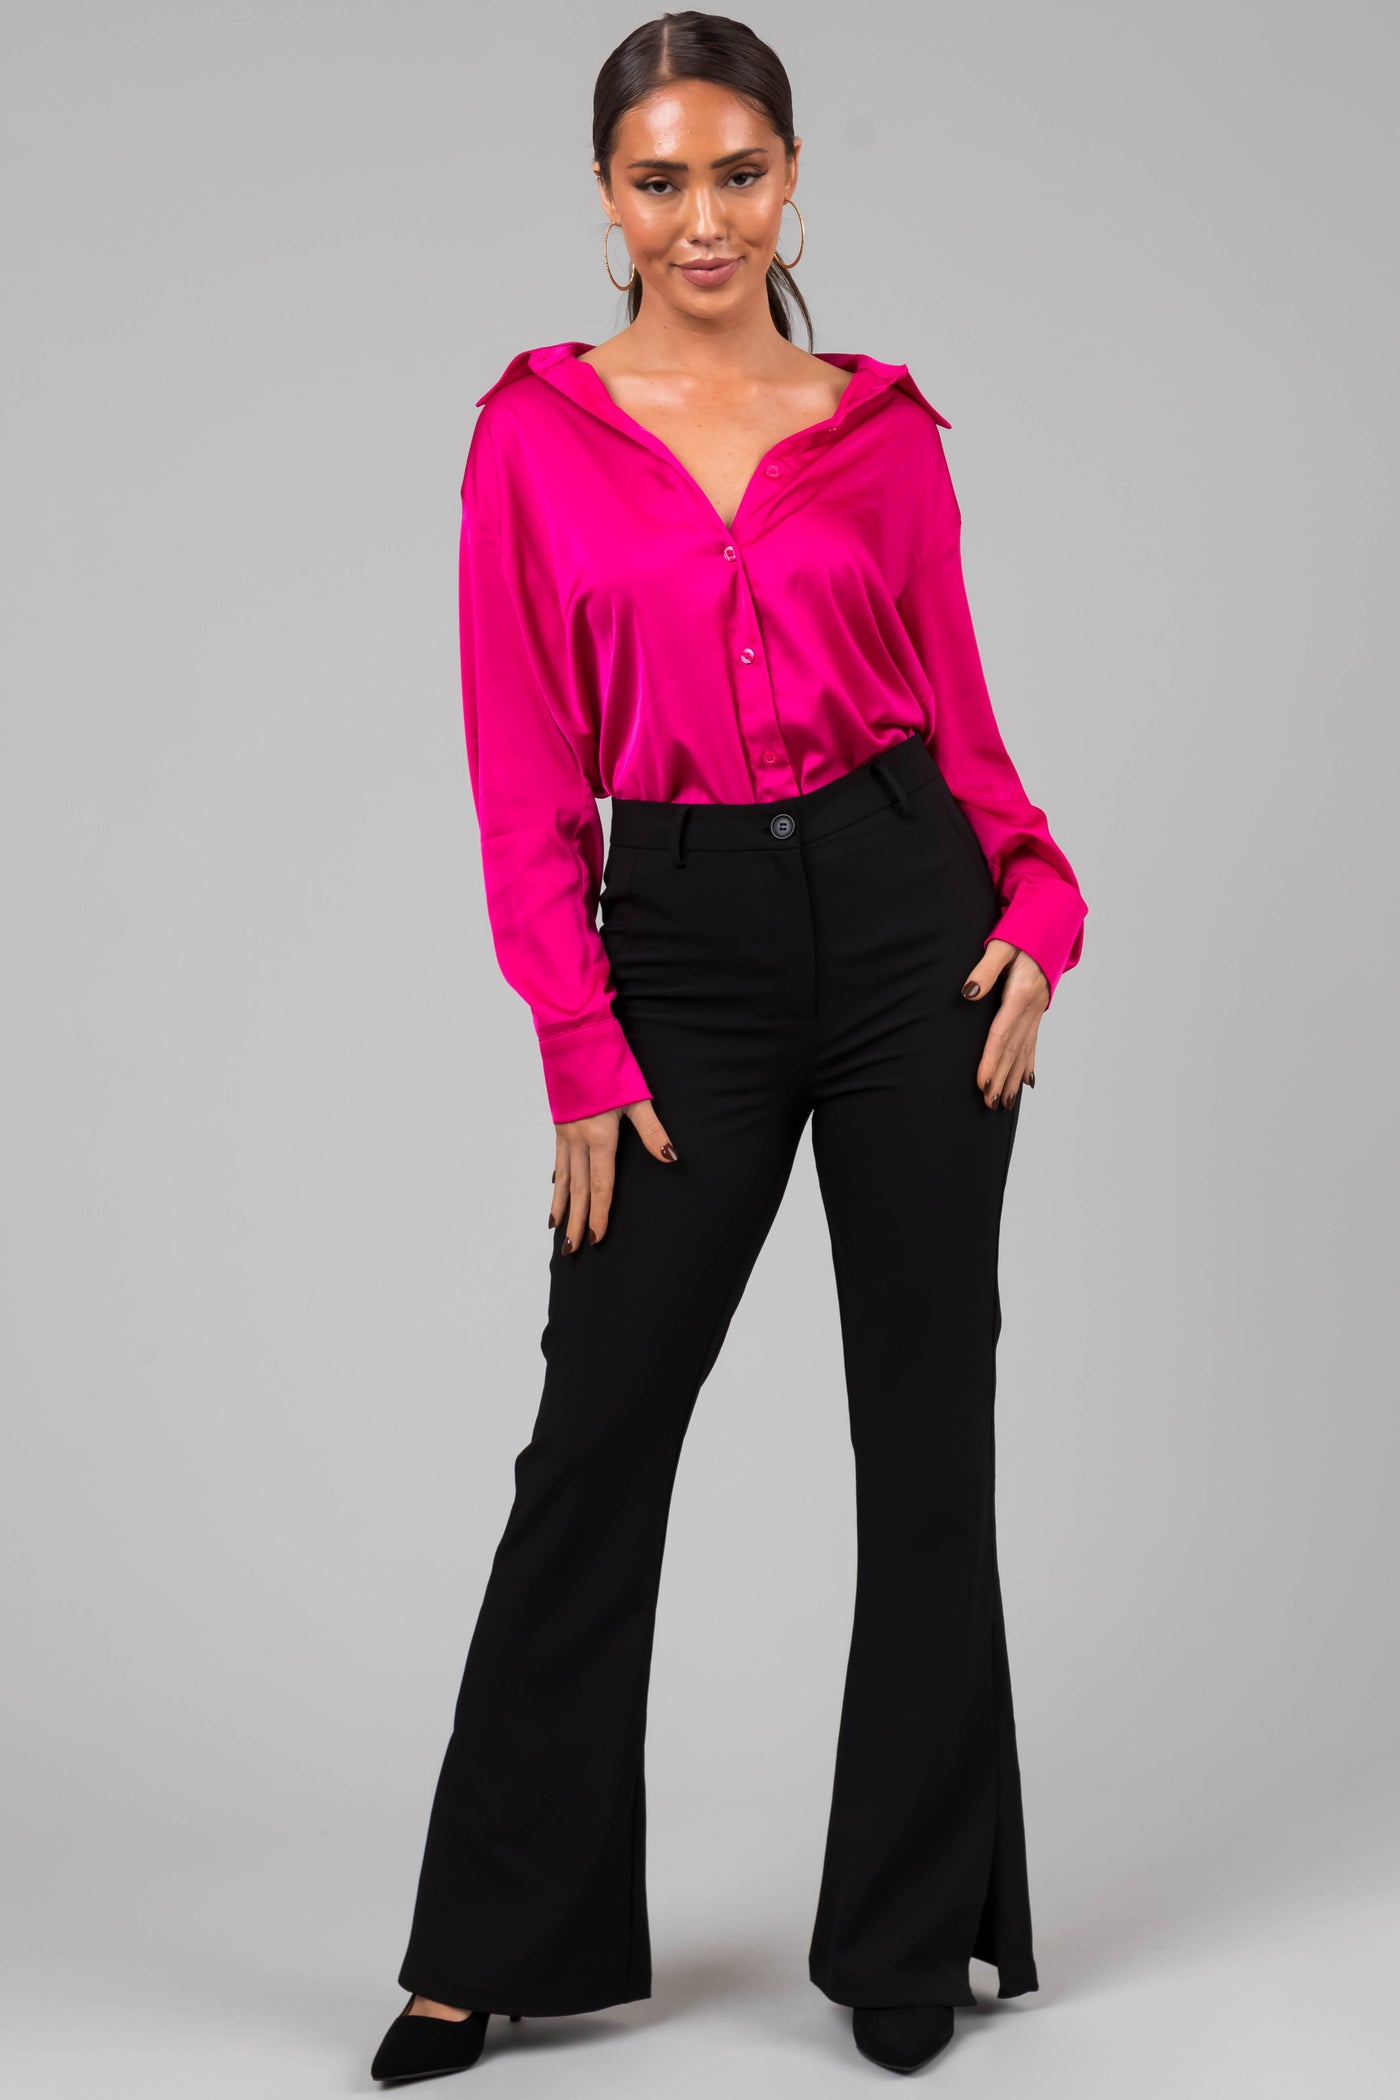 Hot Pink Satin Button Front Collared Shirt